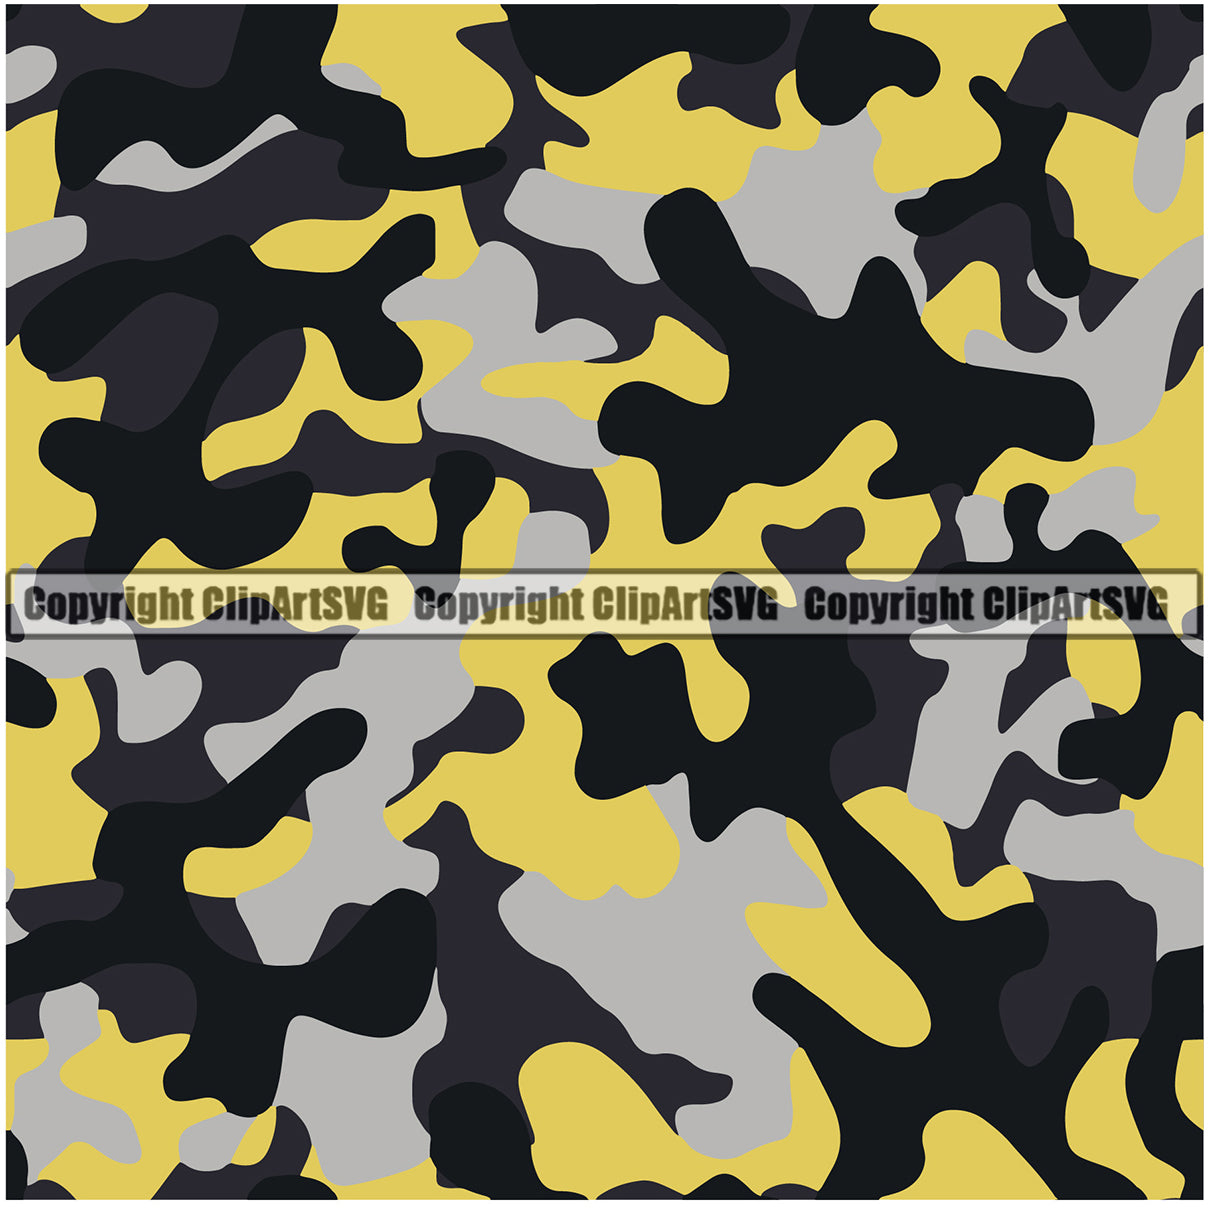 Vector sports shirt background image.yellow camouflage military